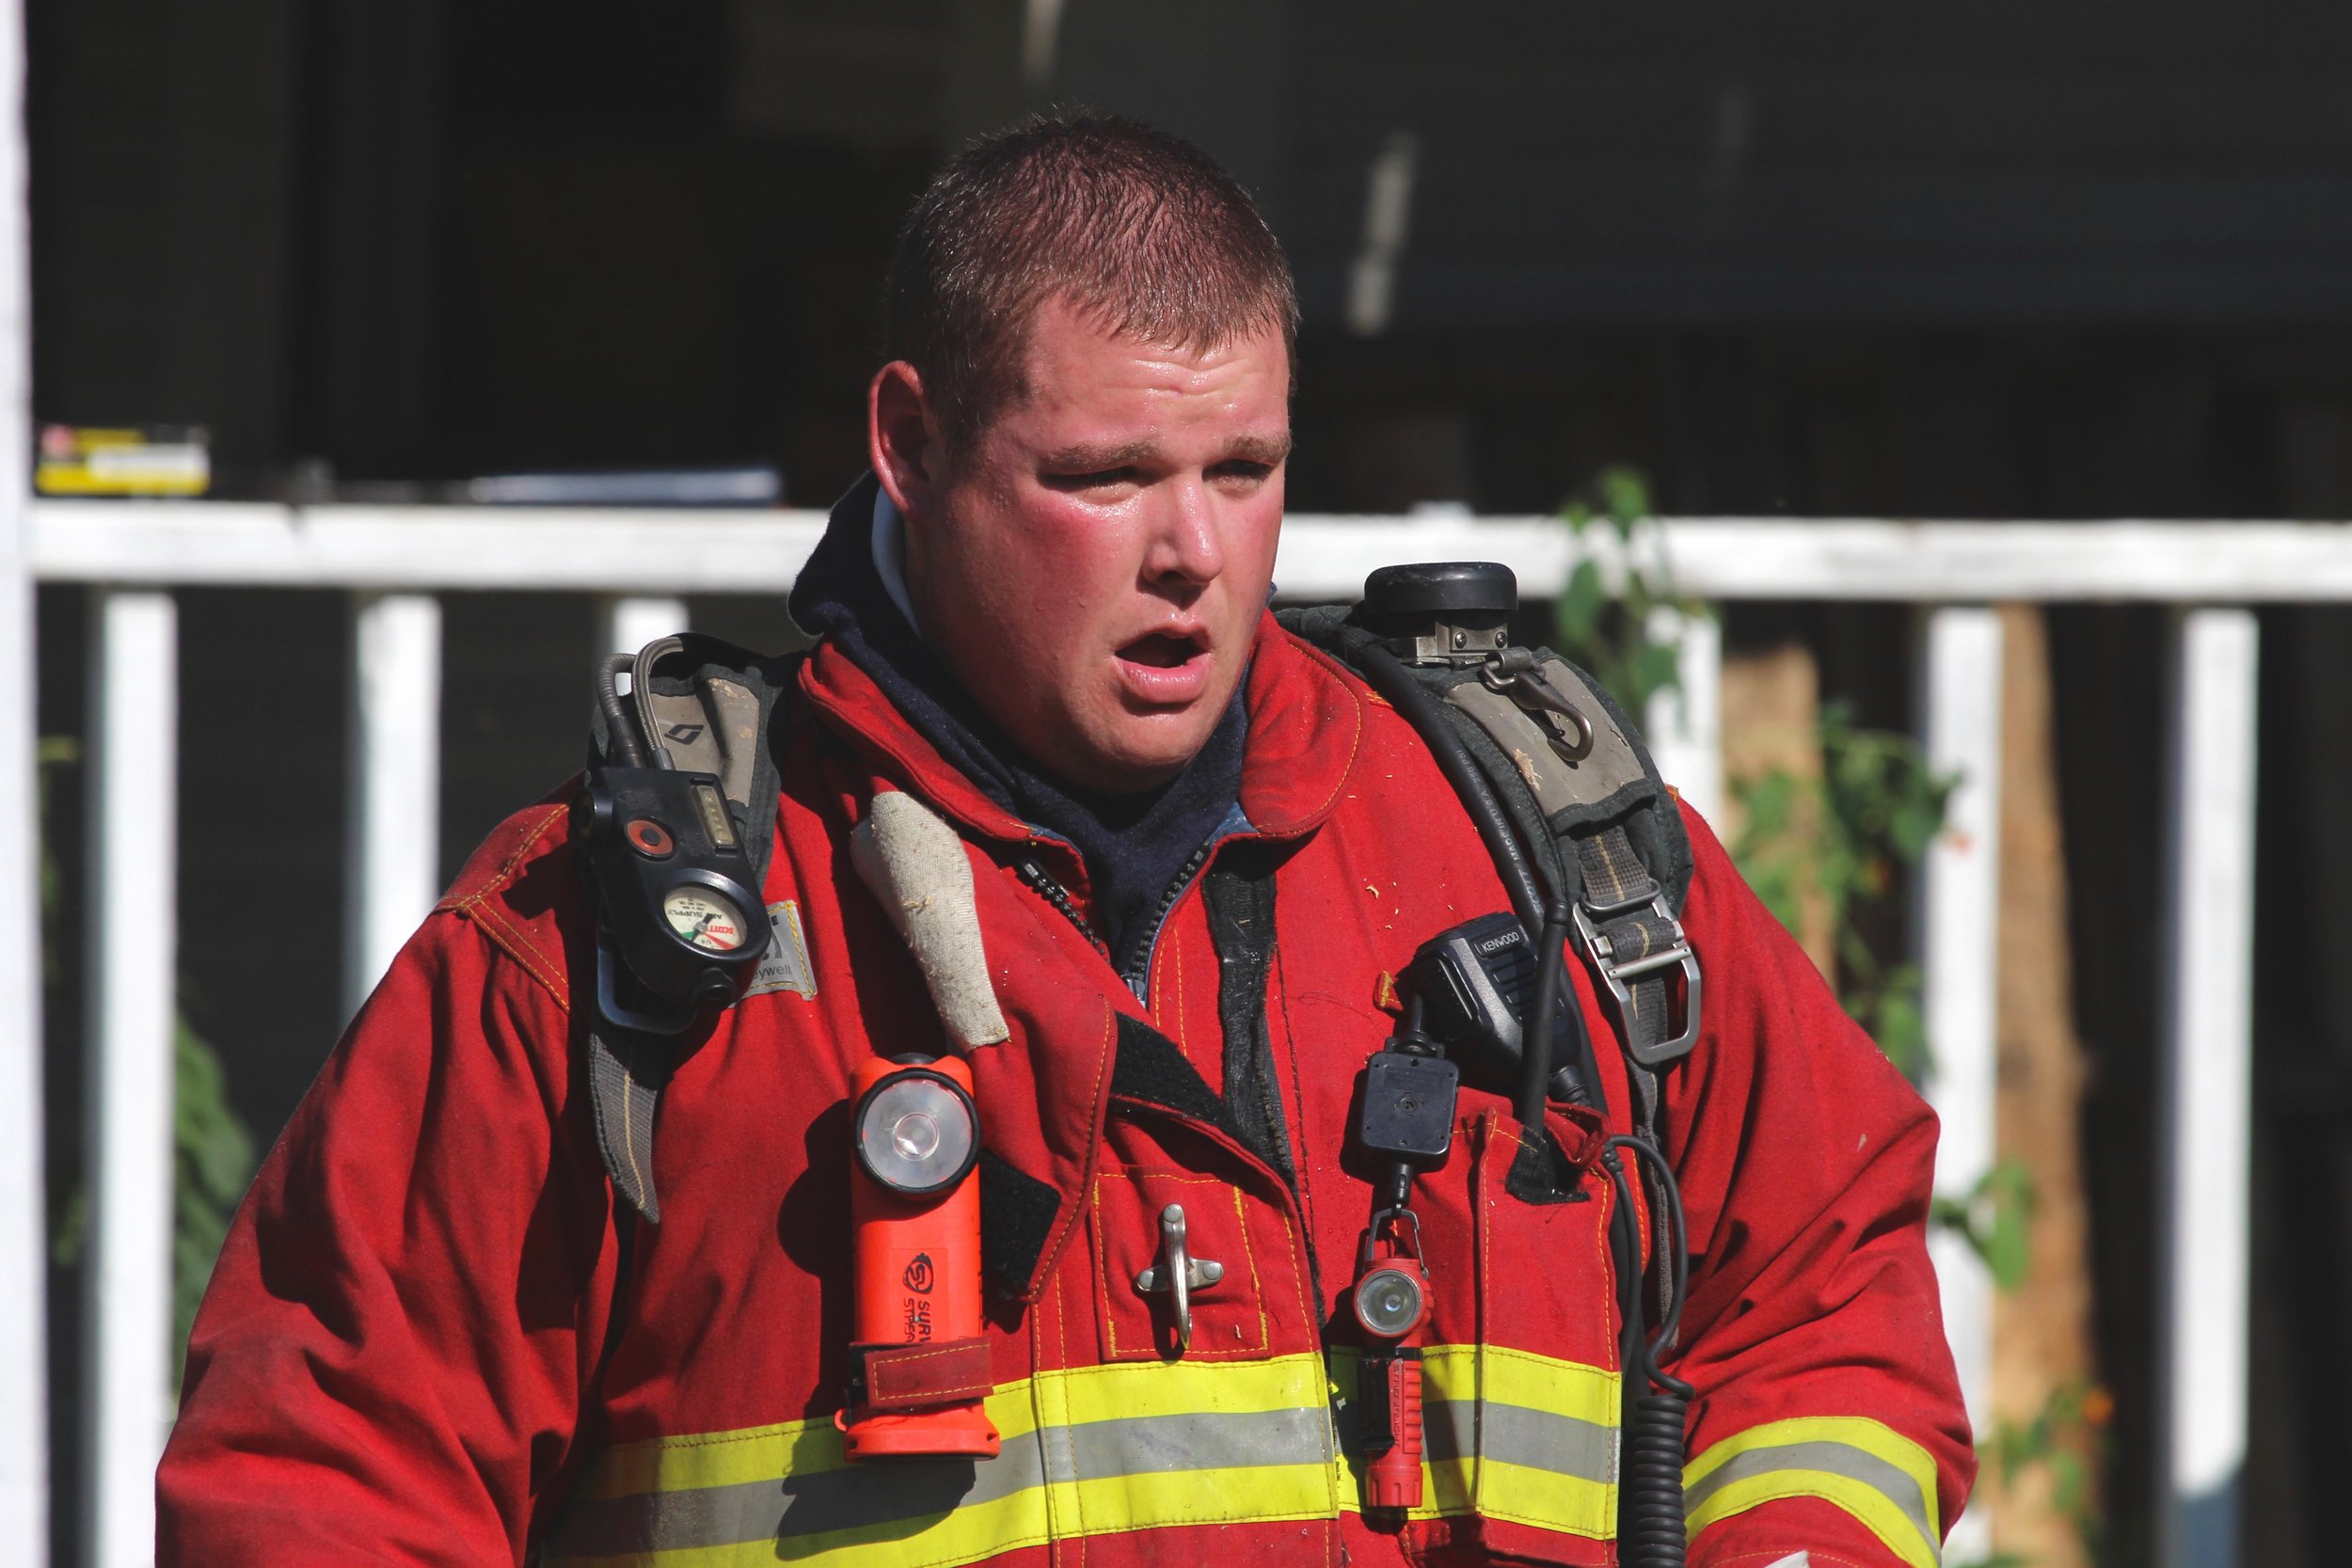   Waterbury Firefighter and Training Officer Kyle Guyette. Photo by René Morse  